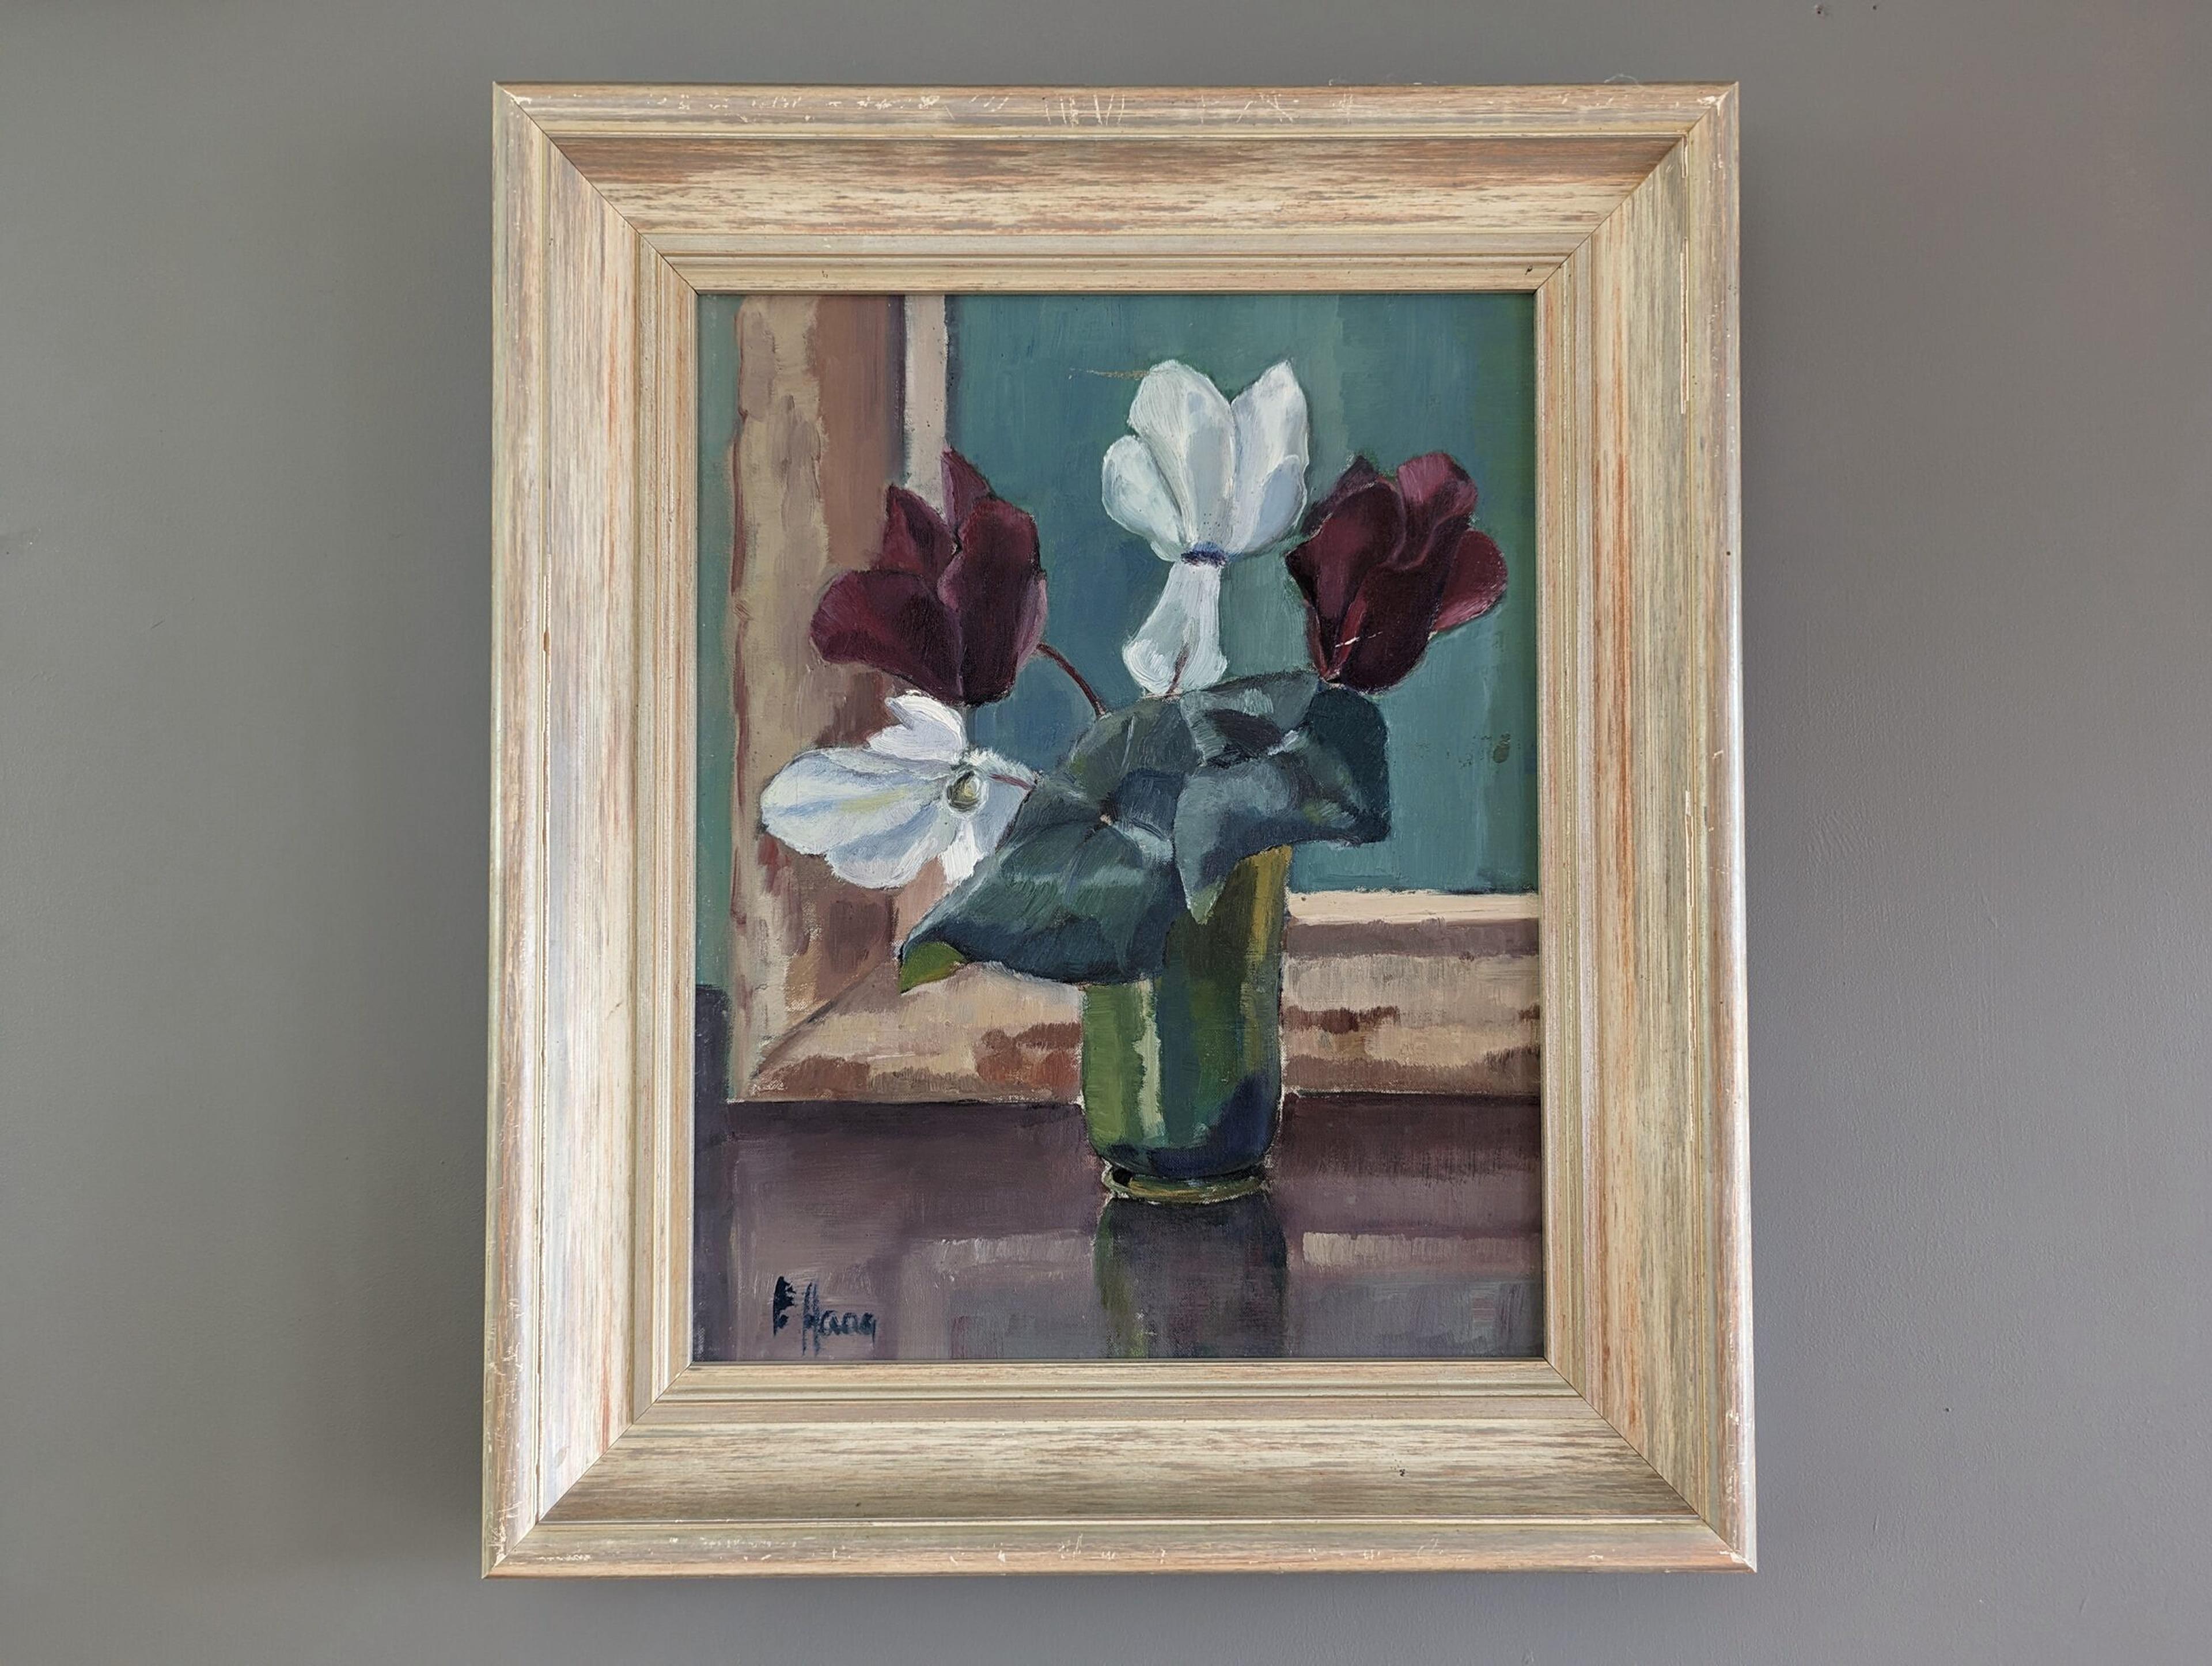 Vintage Mid-Century Modern Still Life Framed Oil Painting - Vase of Cyclamens - Brown Still-Life Painting by Unknown